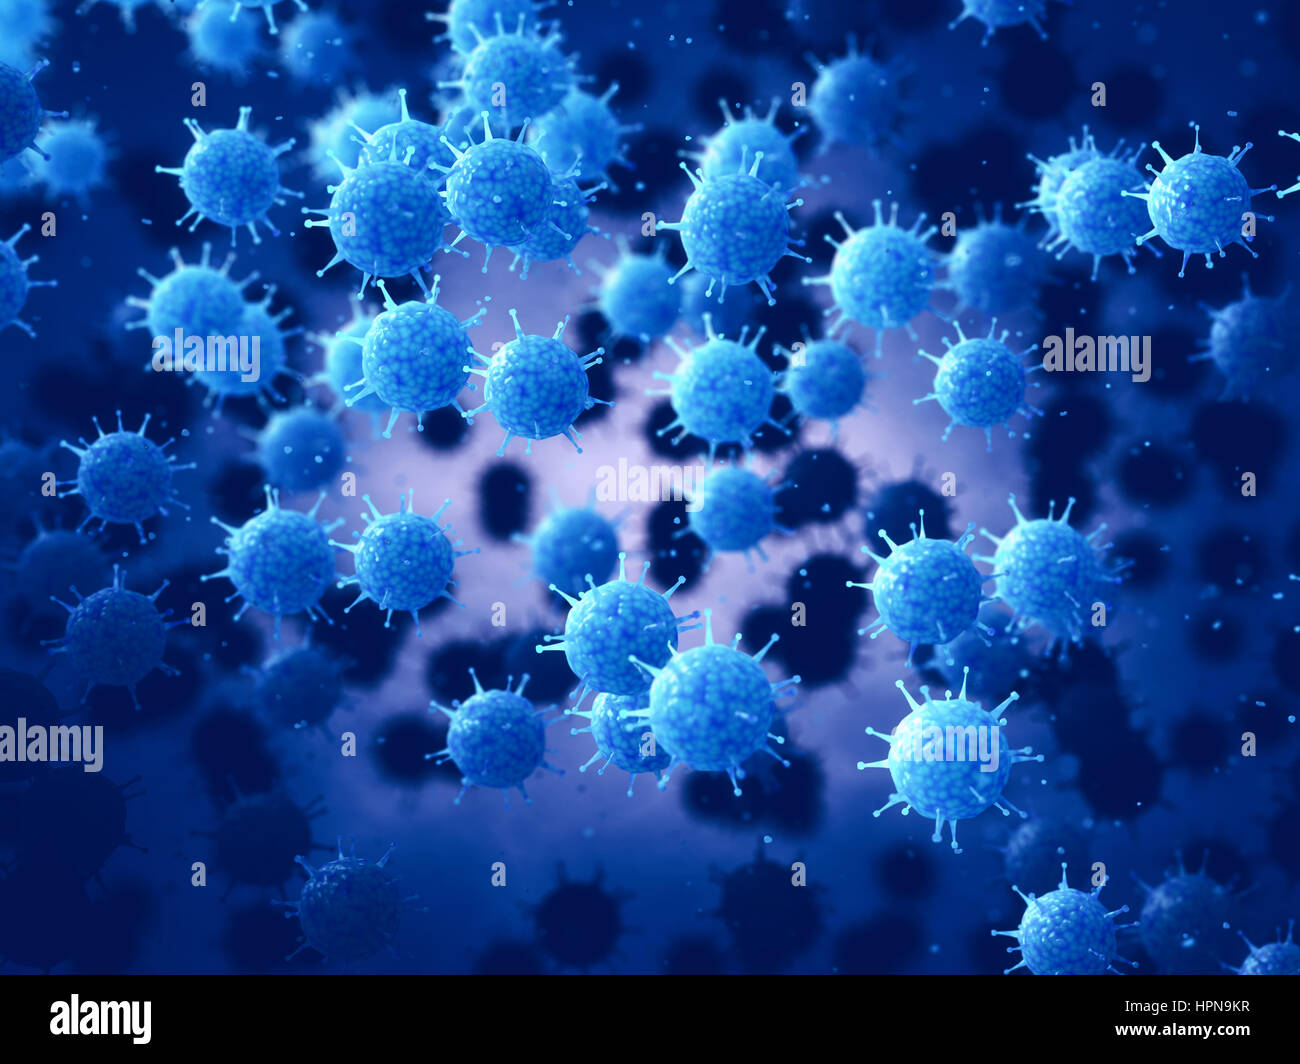 Viruses are infectious pathogens that replicates in living cells , Viral disease epidemic Stock Photo